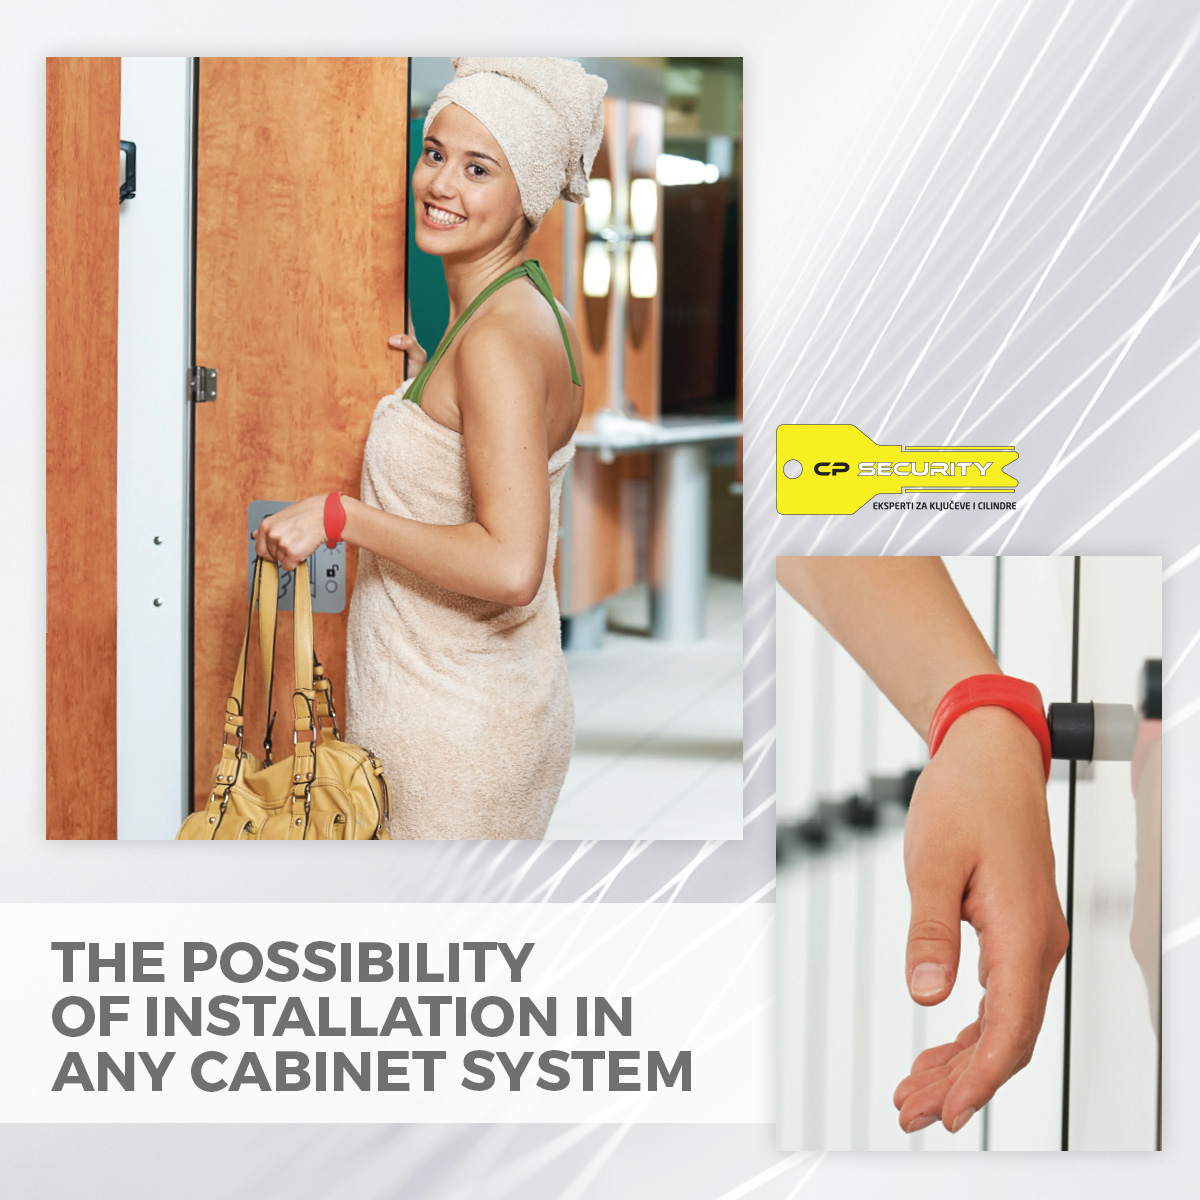 Gantner electronic lock for access control for cabinets